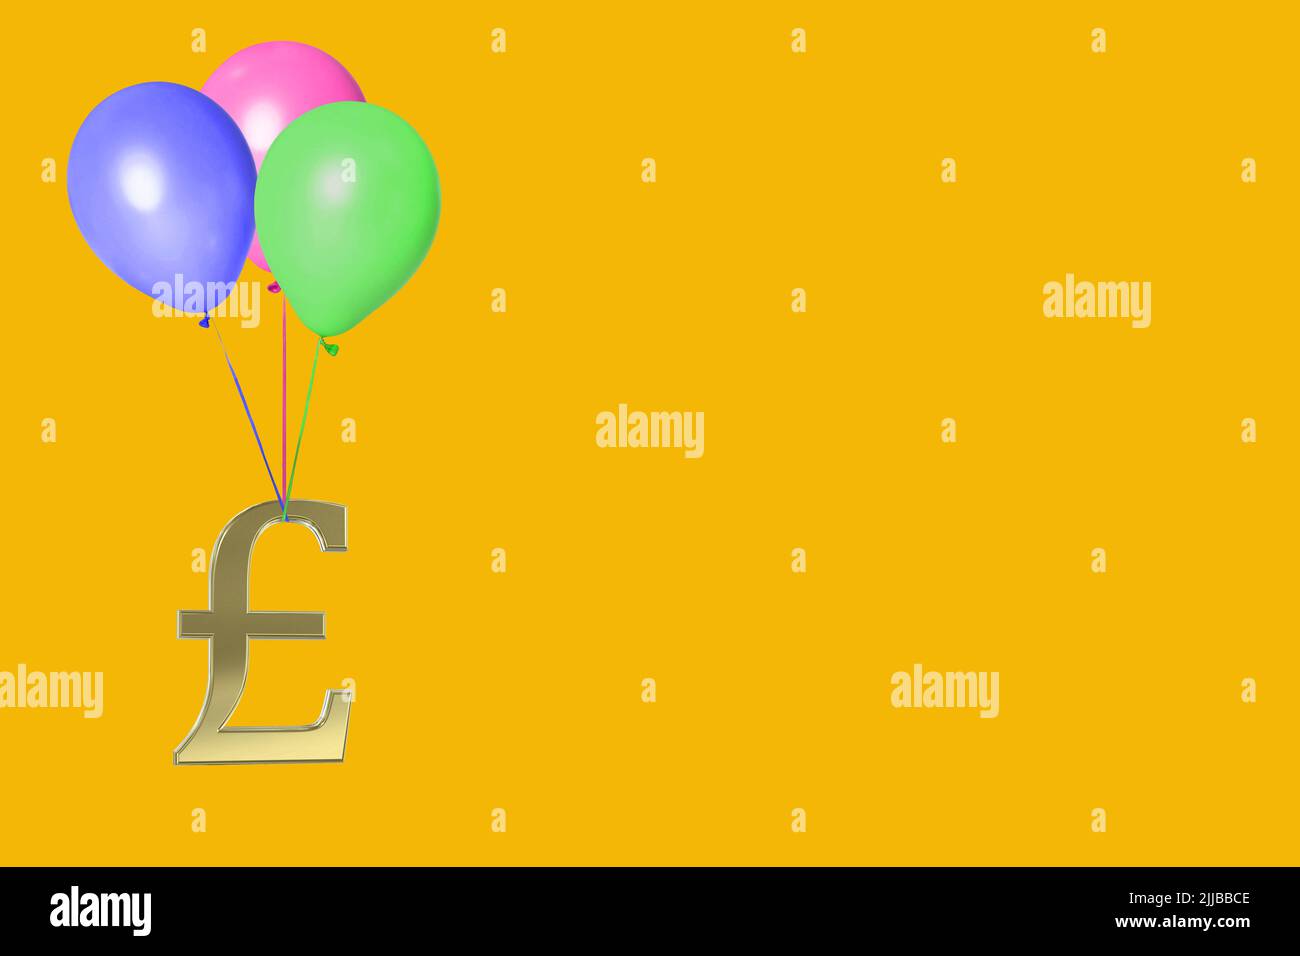 3D gold pound currency symbol symbols sign signs isolated on colorful colourful yellow background pound  inflation concept Stock Photo